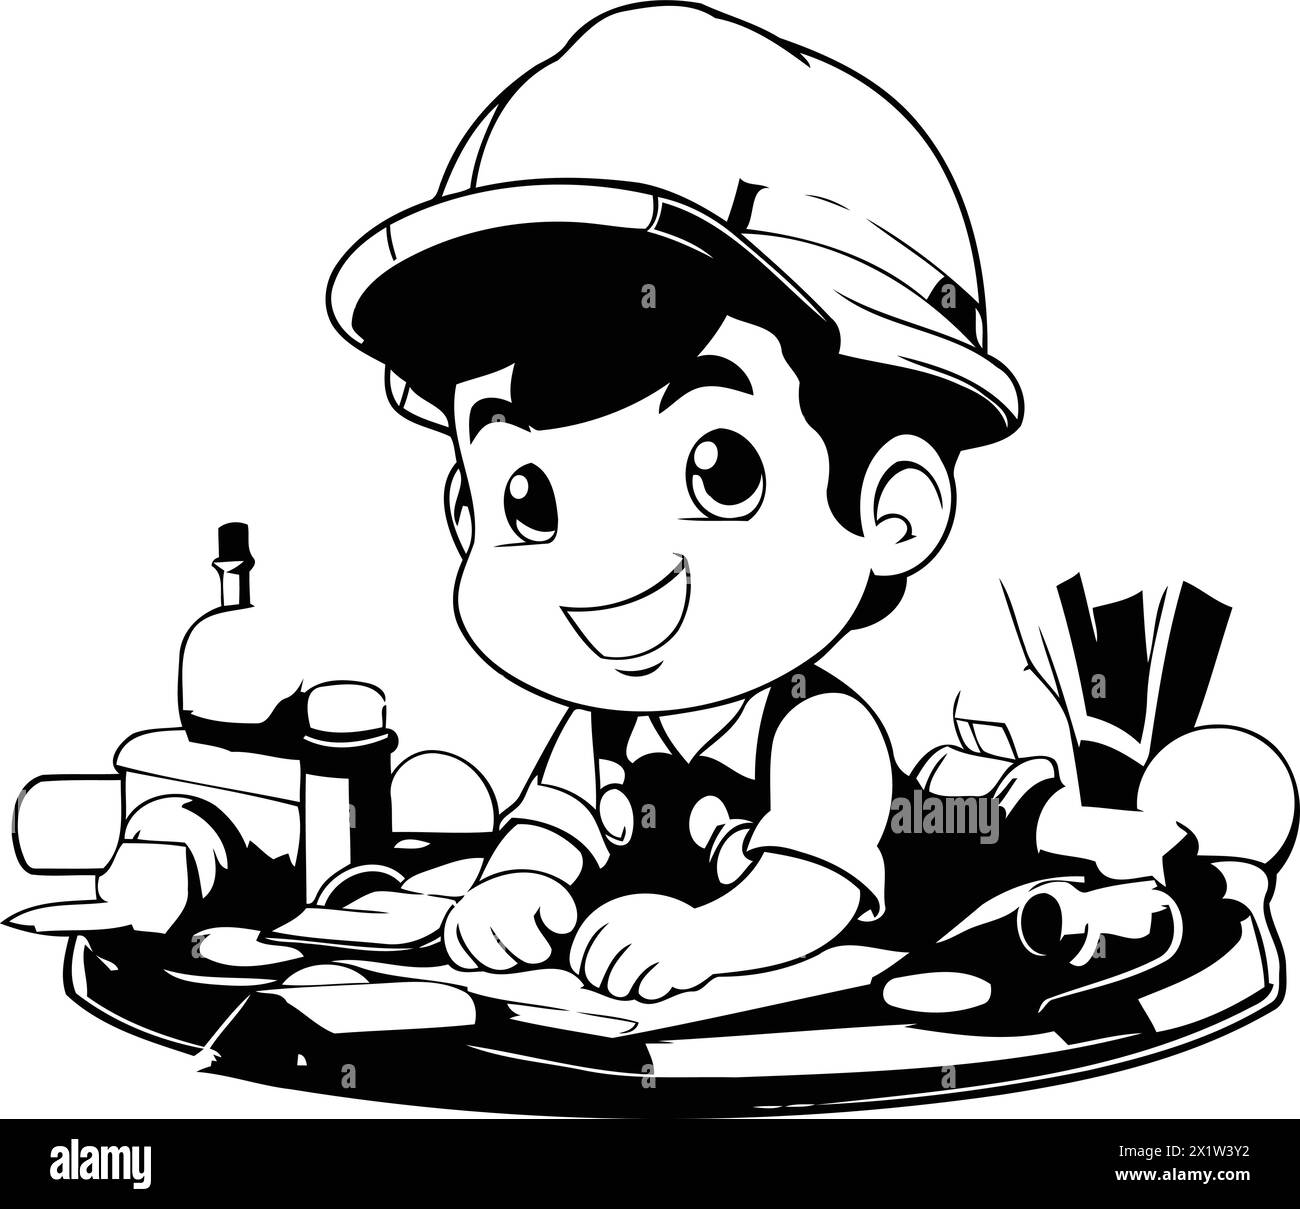 Illustration of a Cute Little Boy Wearing a Hard Hat and Working Outdoors Stock Vector